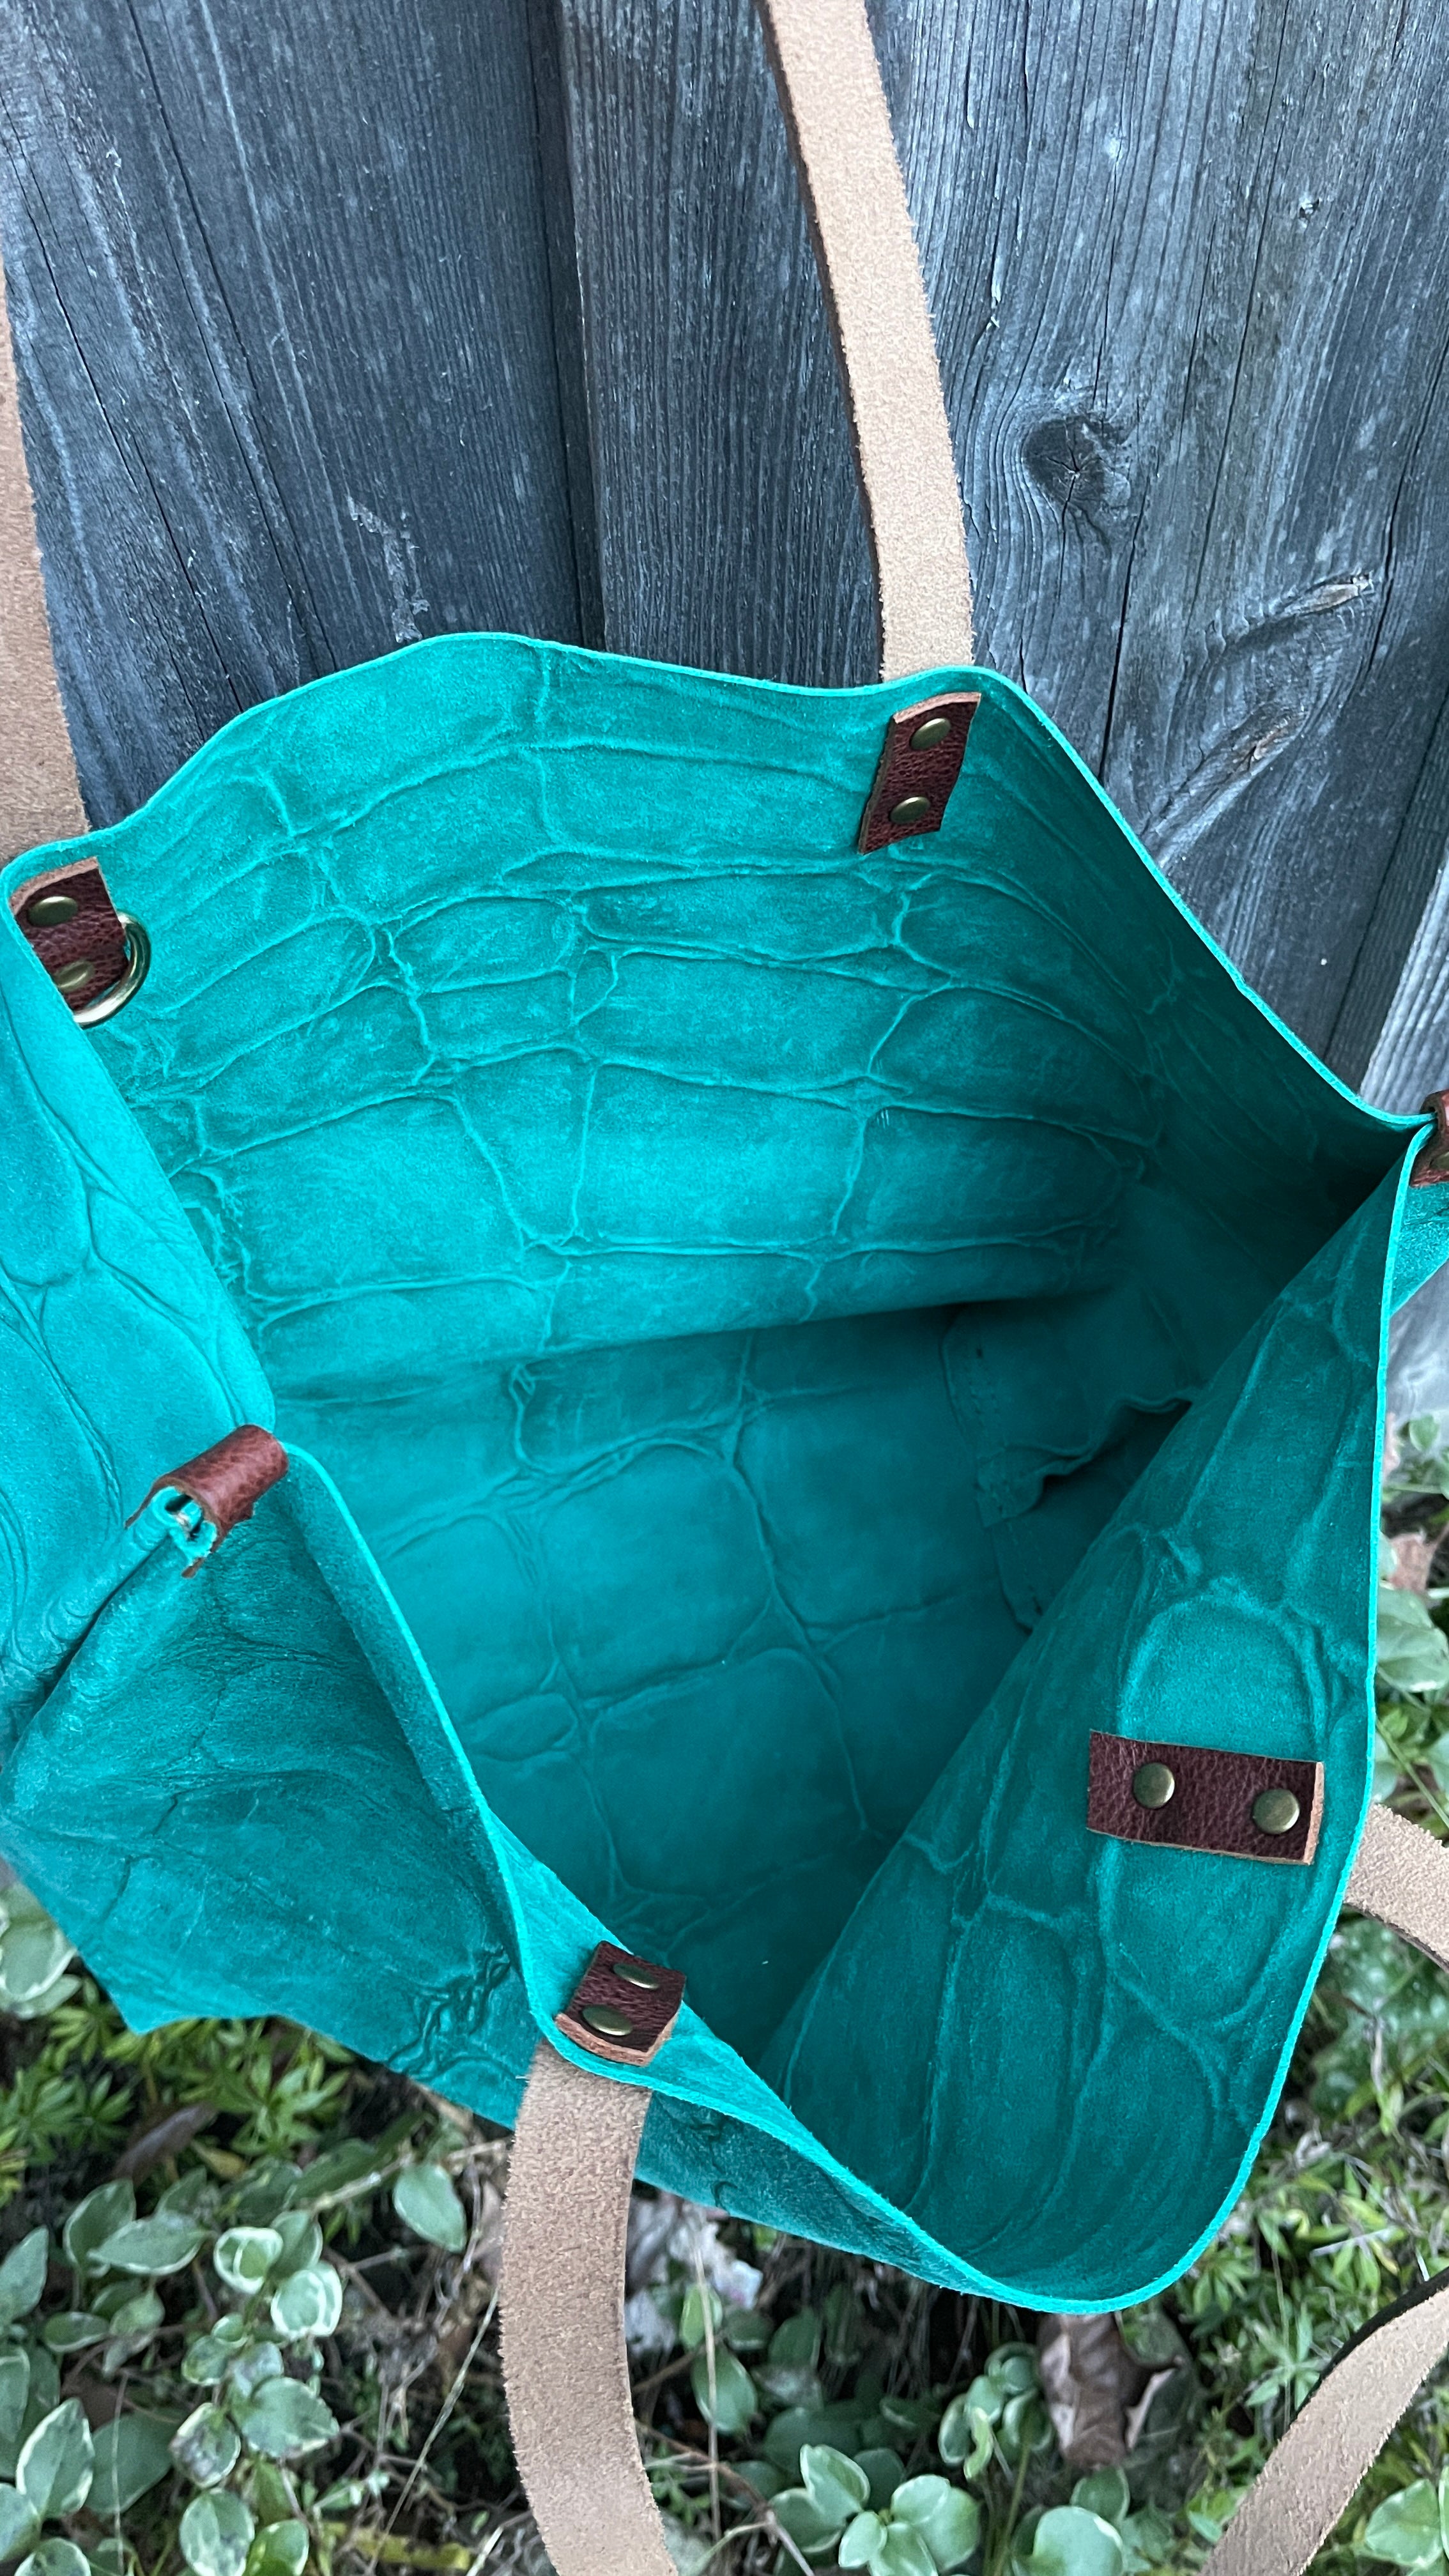 Distressed Turquoise Leather Tote